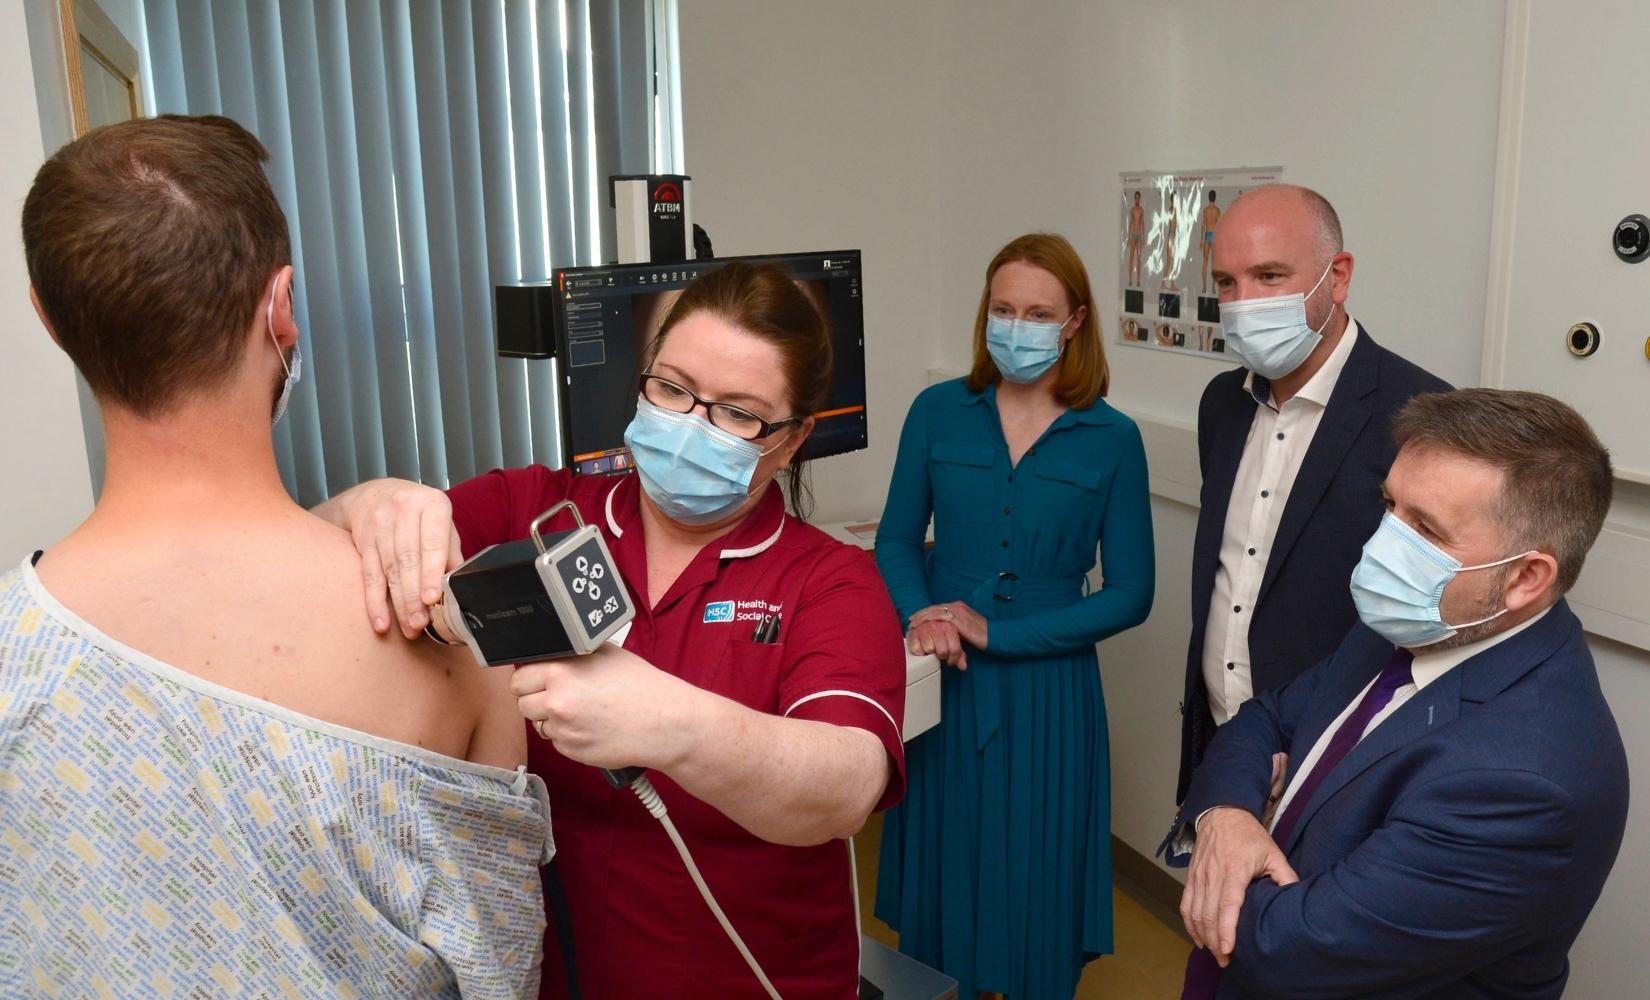 Health Minister Launches Vital New Service for Skin Cancer Patients in Partnership with Cancer Focus NI